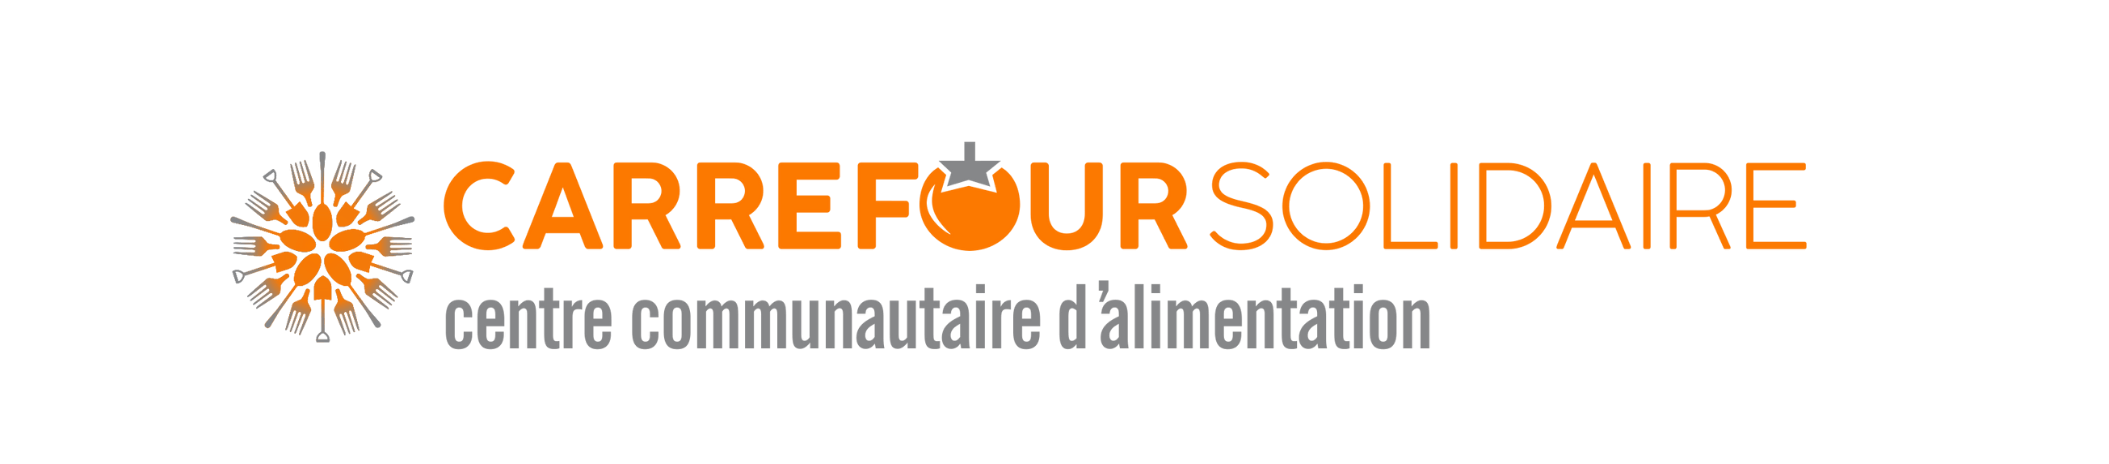 Carrefour Solidaire